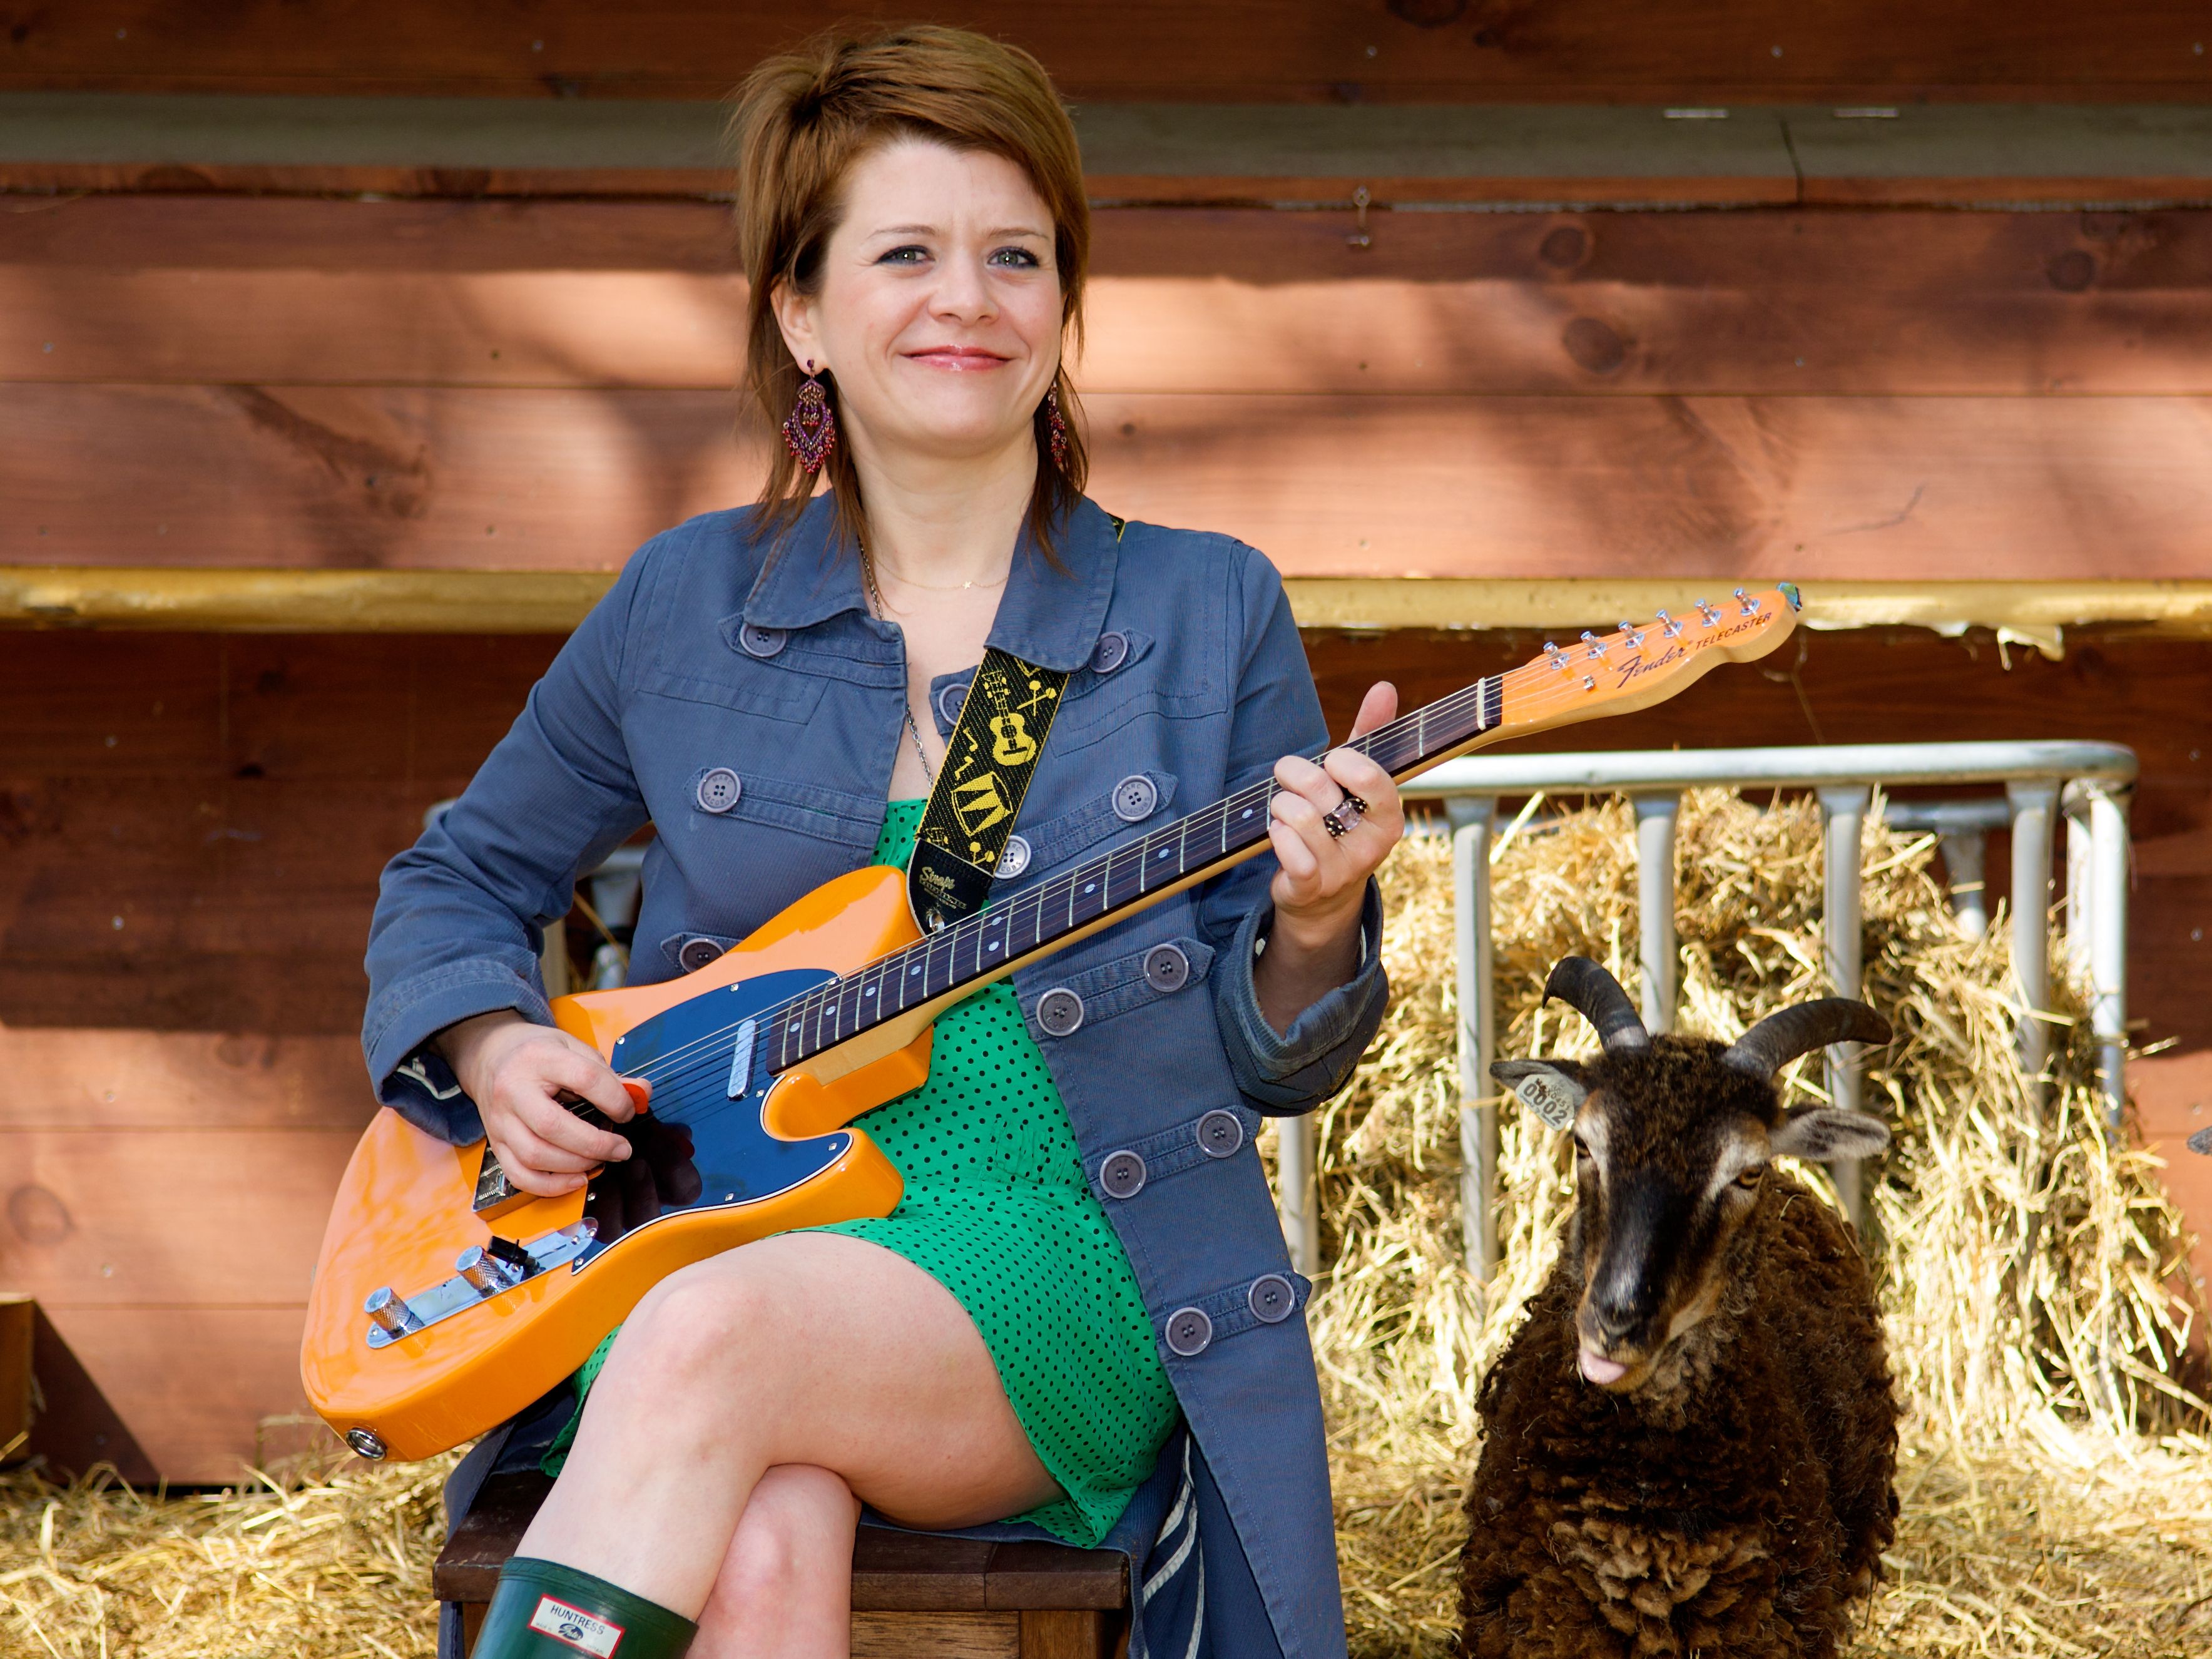 Woman plays orange electric guitar to her goat in outdoor portrait